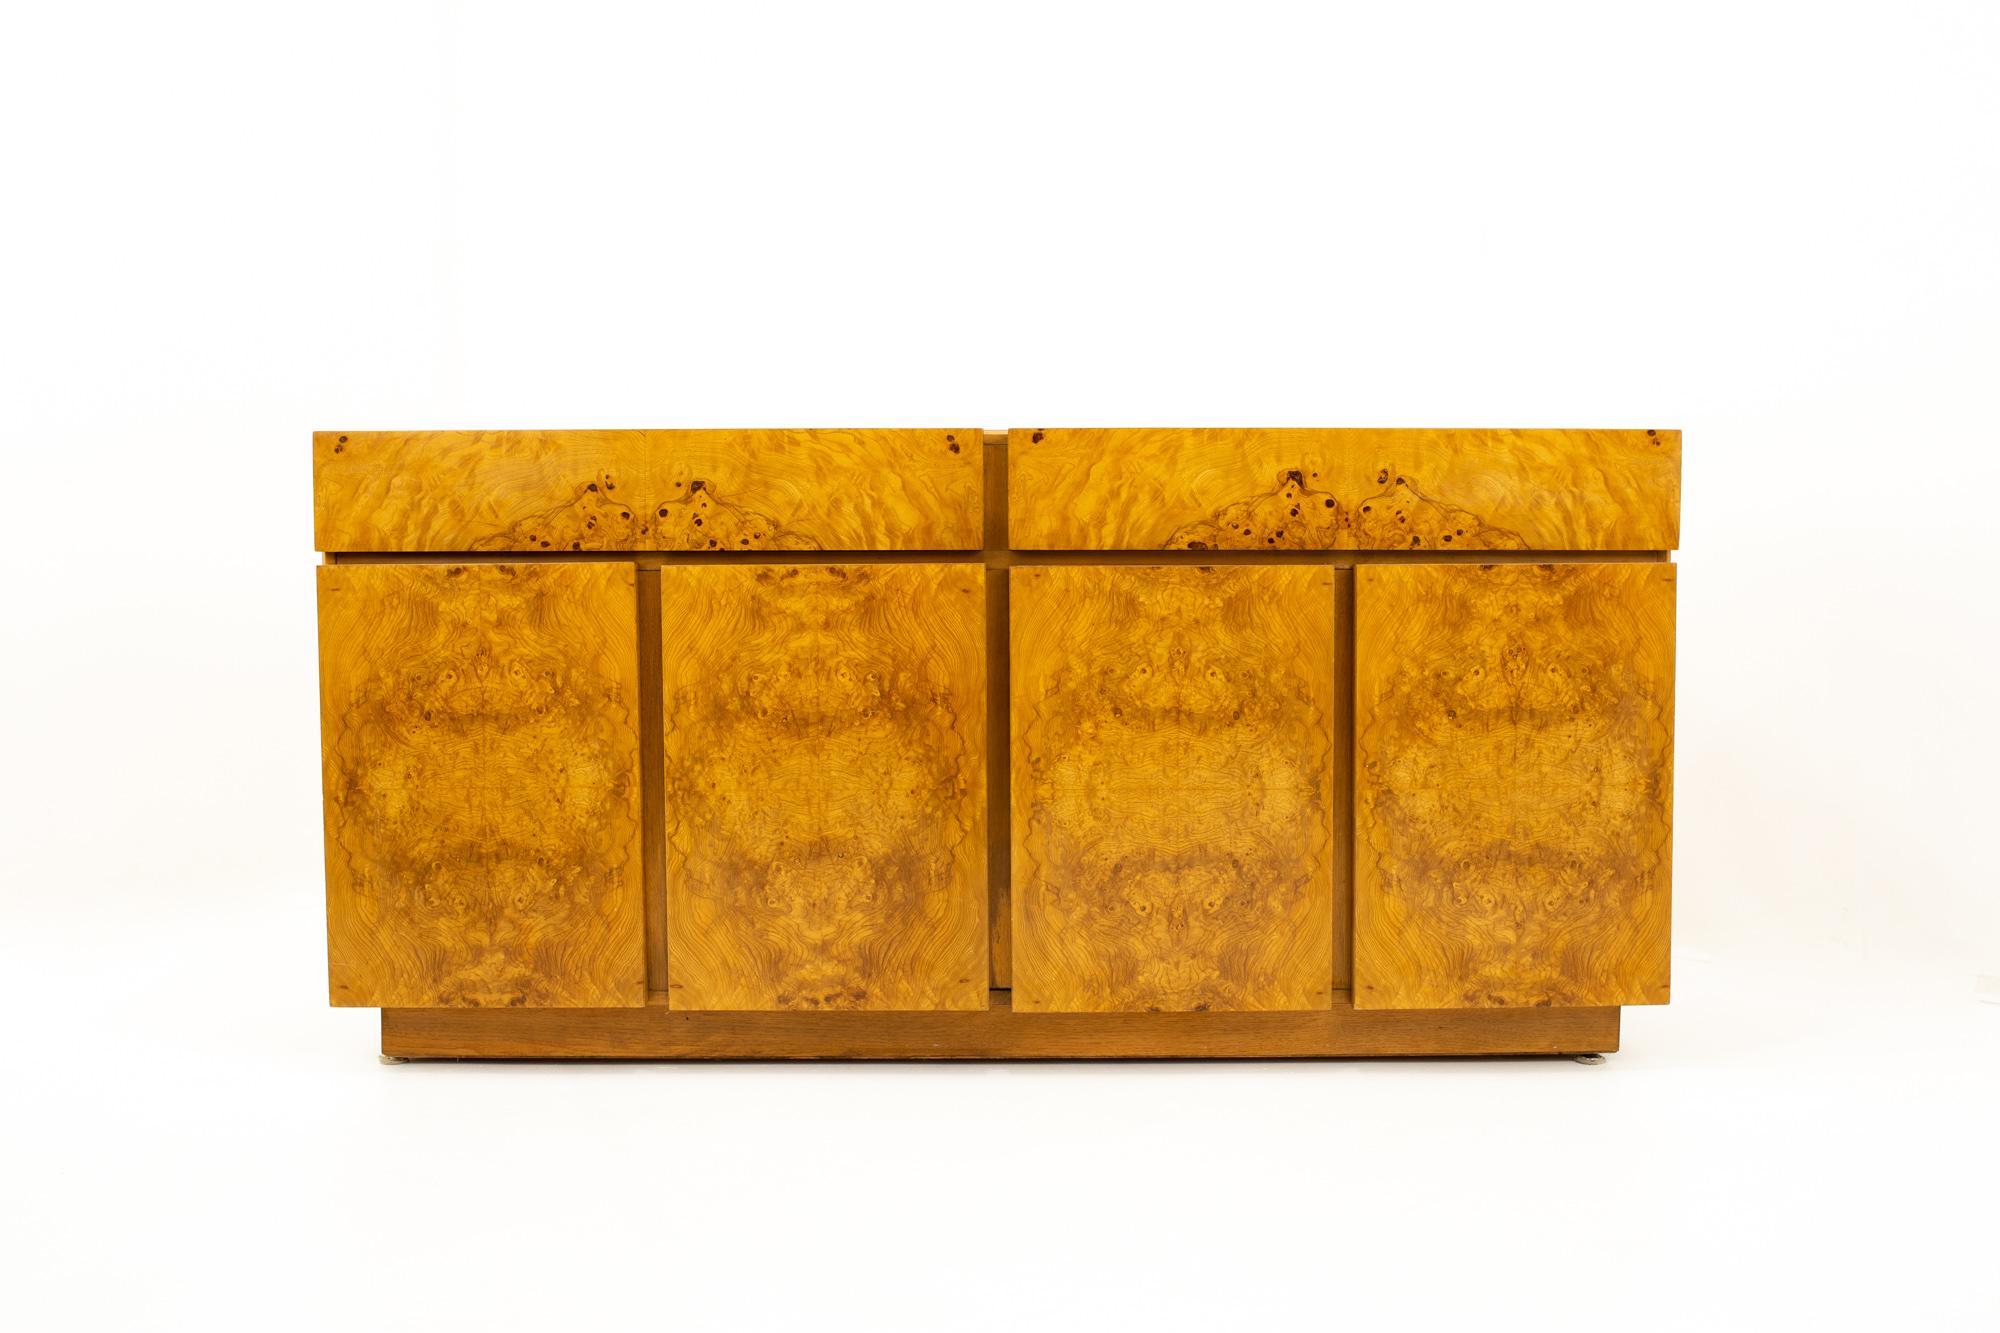 Milo Baughman style lane mid century burlwood and oak sideboard credenza - This credenza has been restored and can be shipped in 2-4 weeks. 

Credenza measures: 68 wide x 18 deep x 32 high

All pieces of furniture can be had in what we call